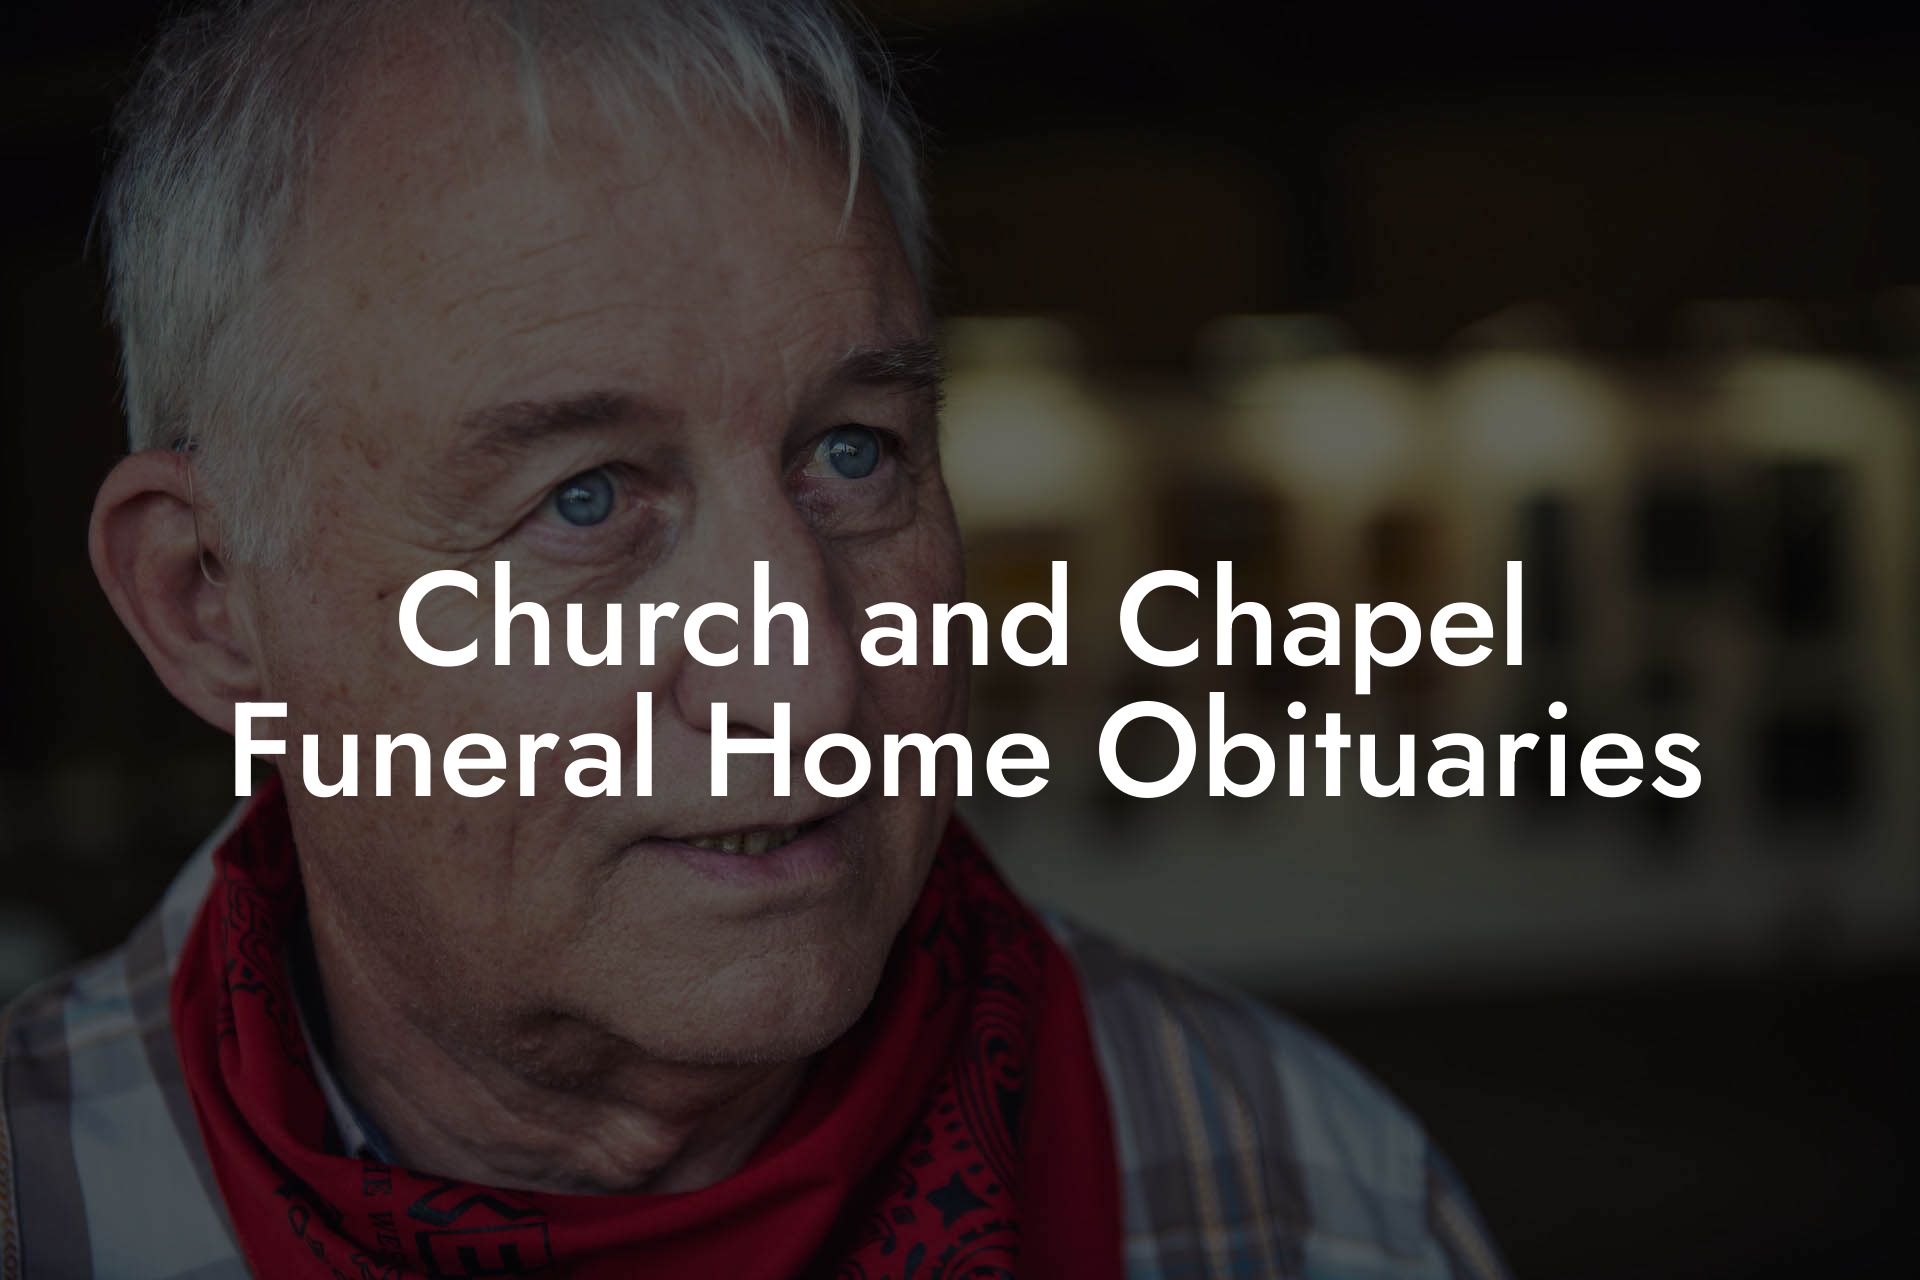 Church and Chapel Funeral Home Obituaries - Eulogy Assistant